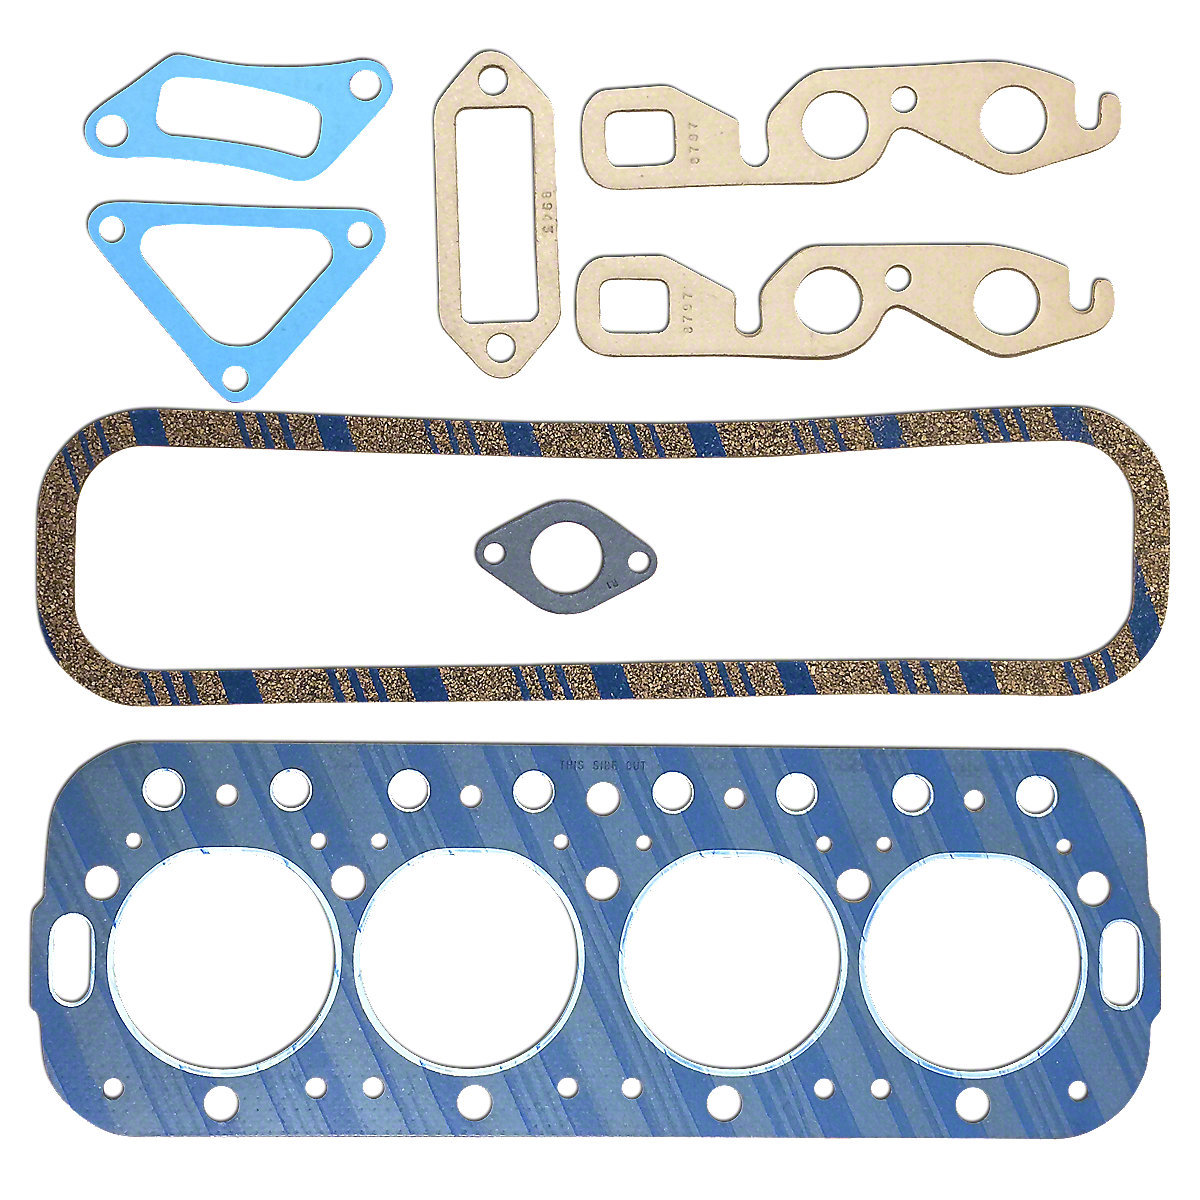 Cylinder Head Gasket Set - SUPER A, SUPER C, 100, 130, 140, 200, 230, 240, 330, 340 WITH C113 OR C123 GAS WITH WATER PUMP